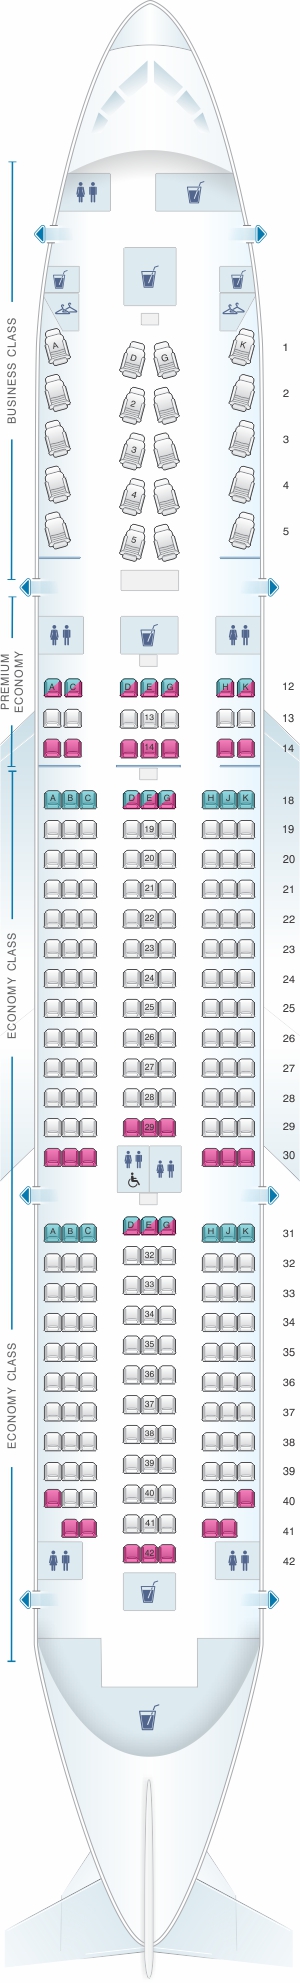 air canada seat selection tool